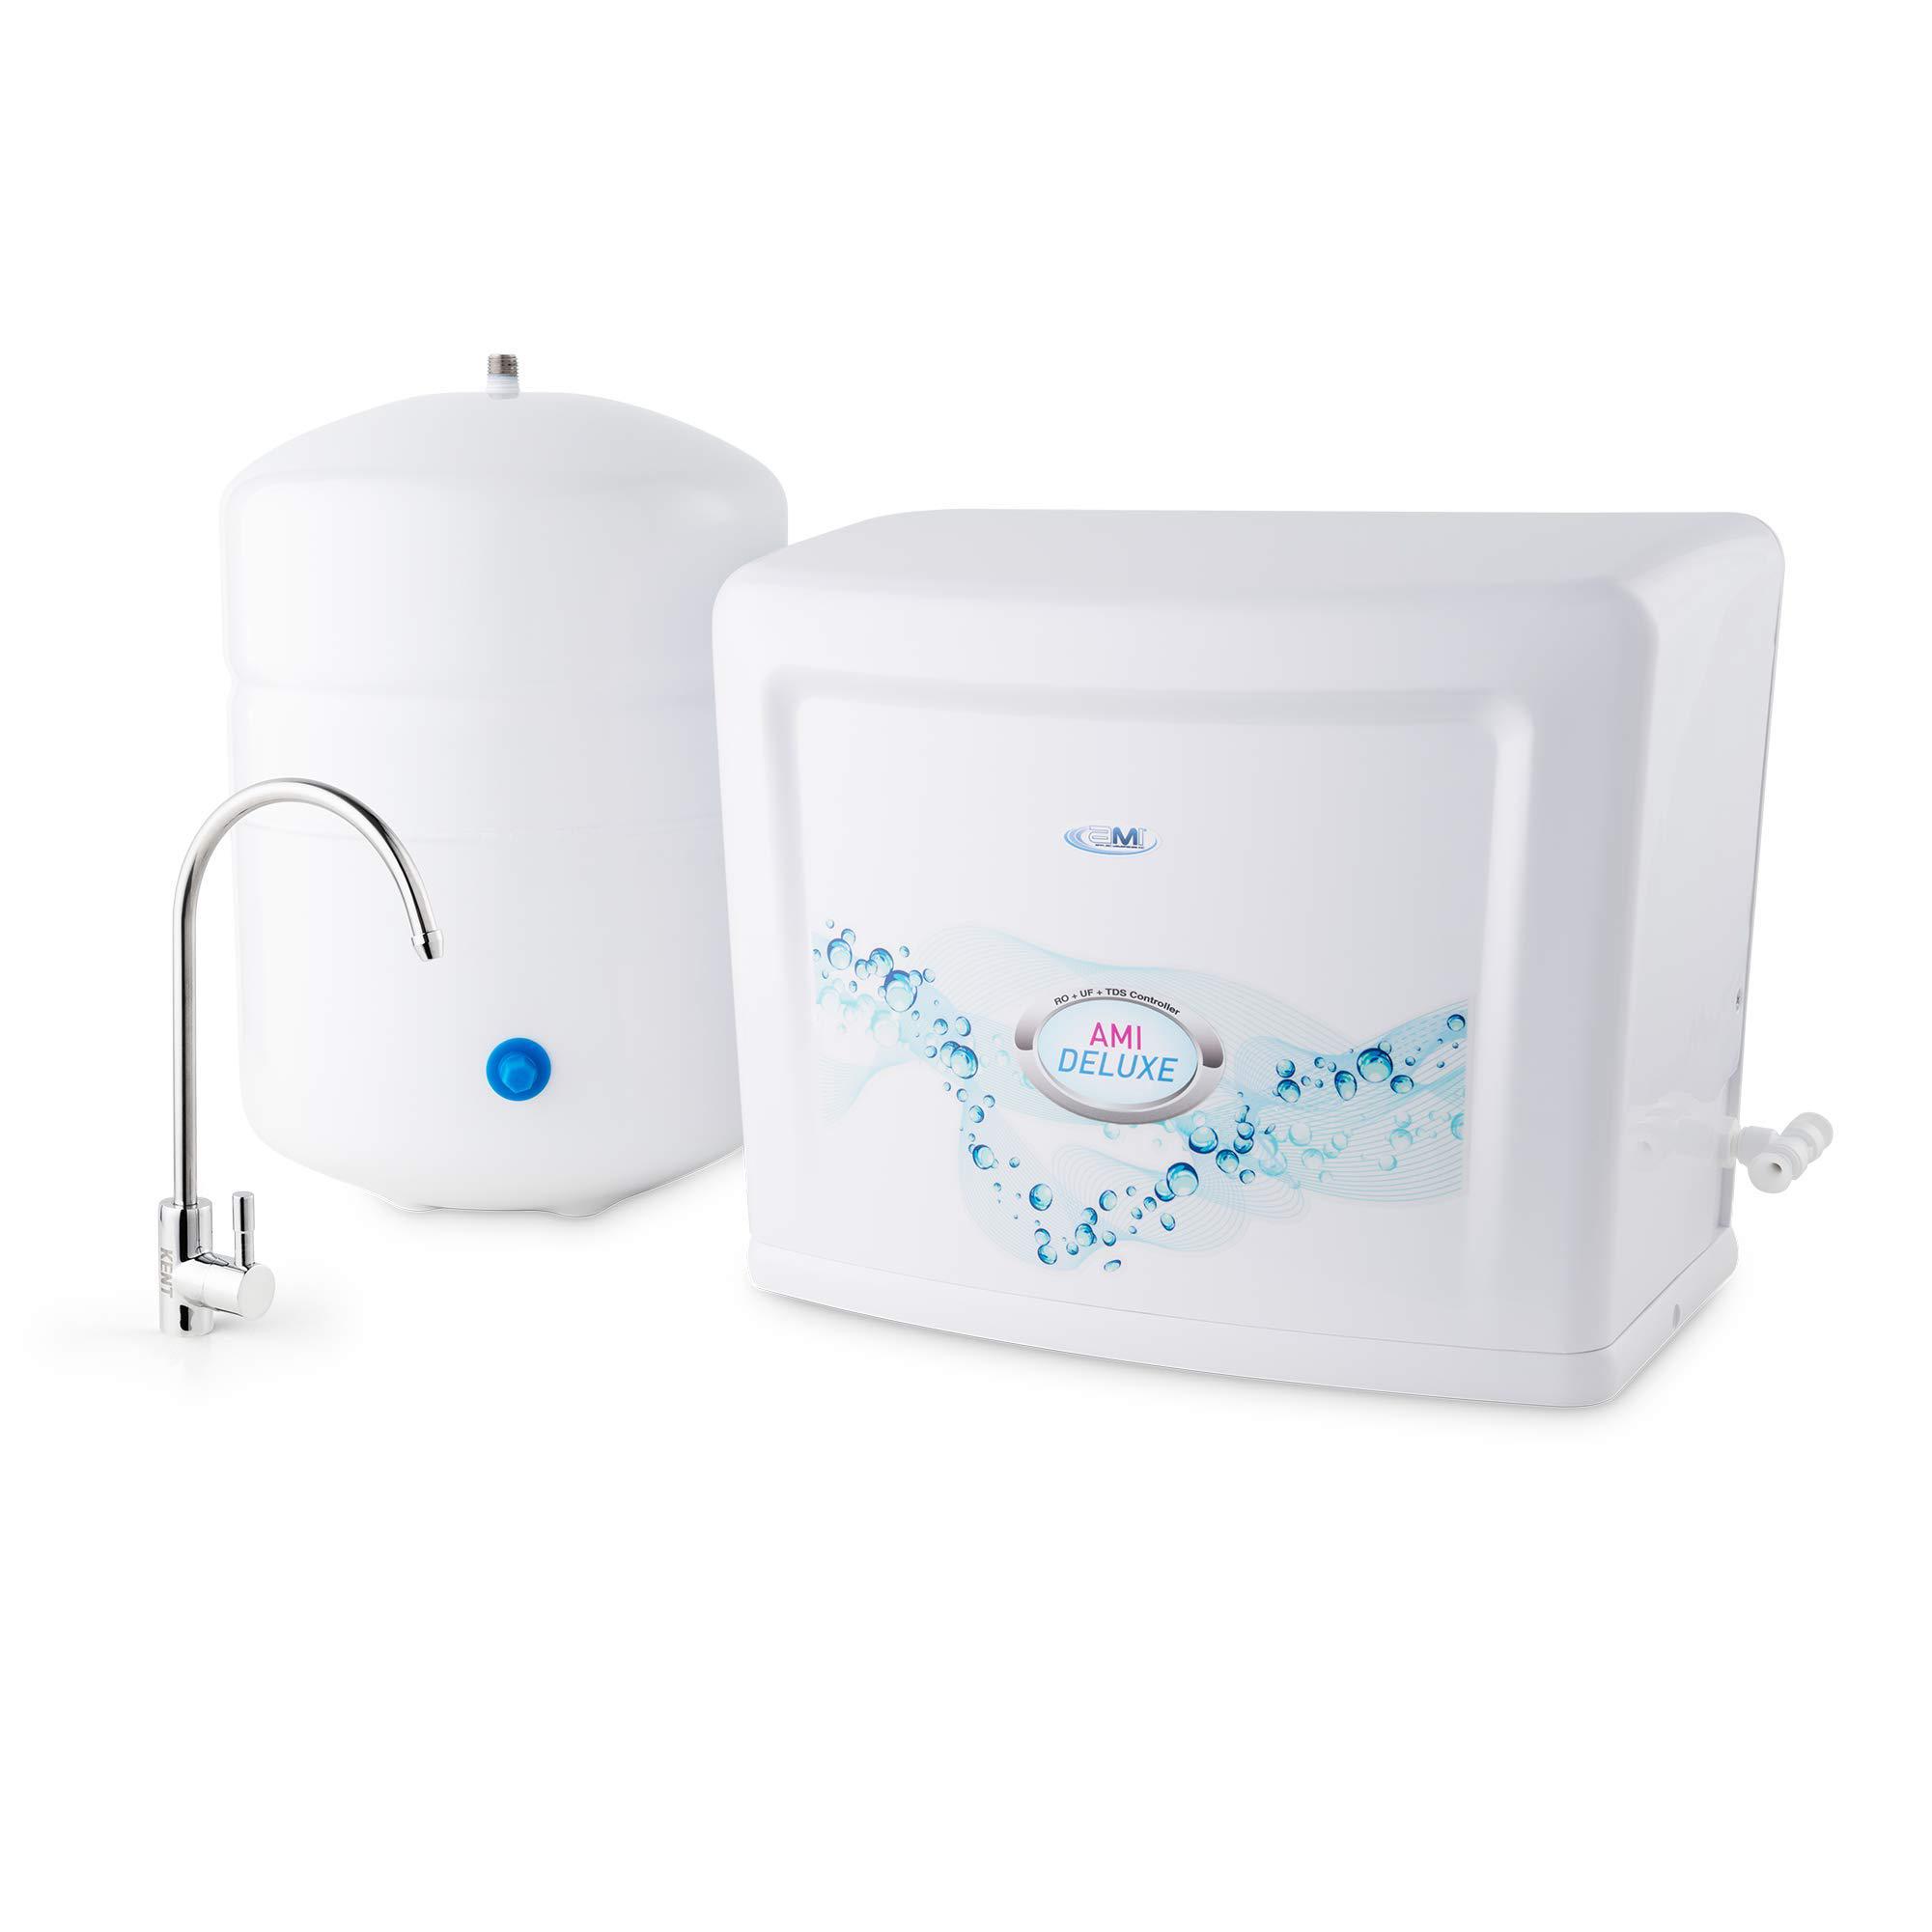 ami deluxe under-the-counter ro purifier system, reverse osmosis water filtration system with uf